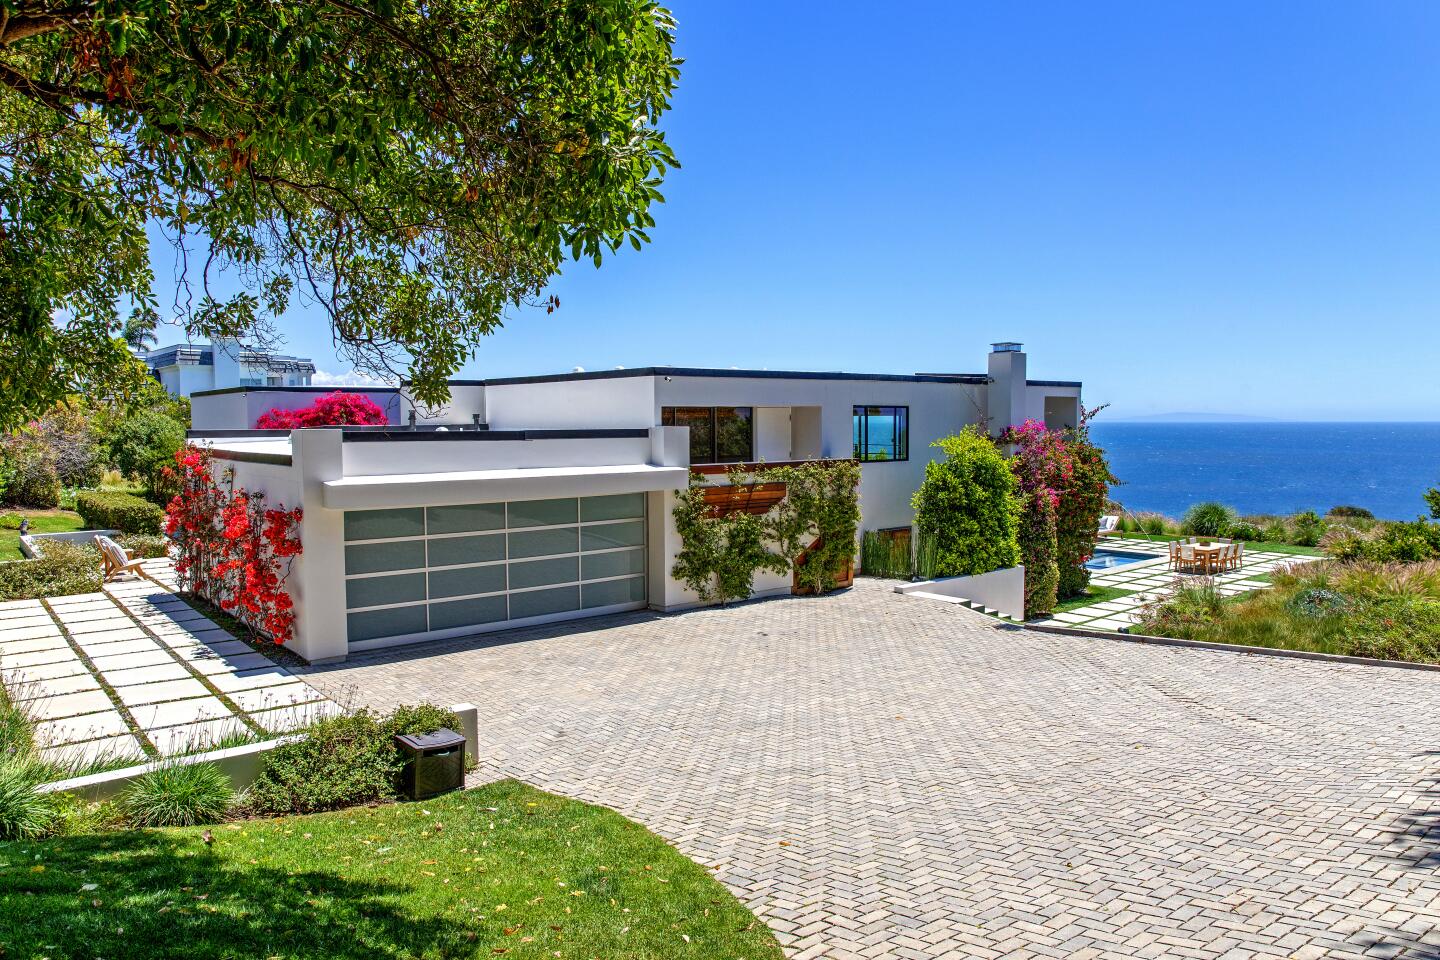 The longtime Malibu home of Robert Conrad sits across from the beach where "The Wild, Wild West" actor learned to surf in the 1950s. A beach volleyball court, a putting green and a saltwater swimming pool accompany the home on a roughly three-quarter-acre lot.